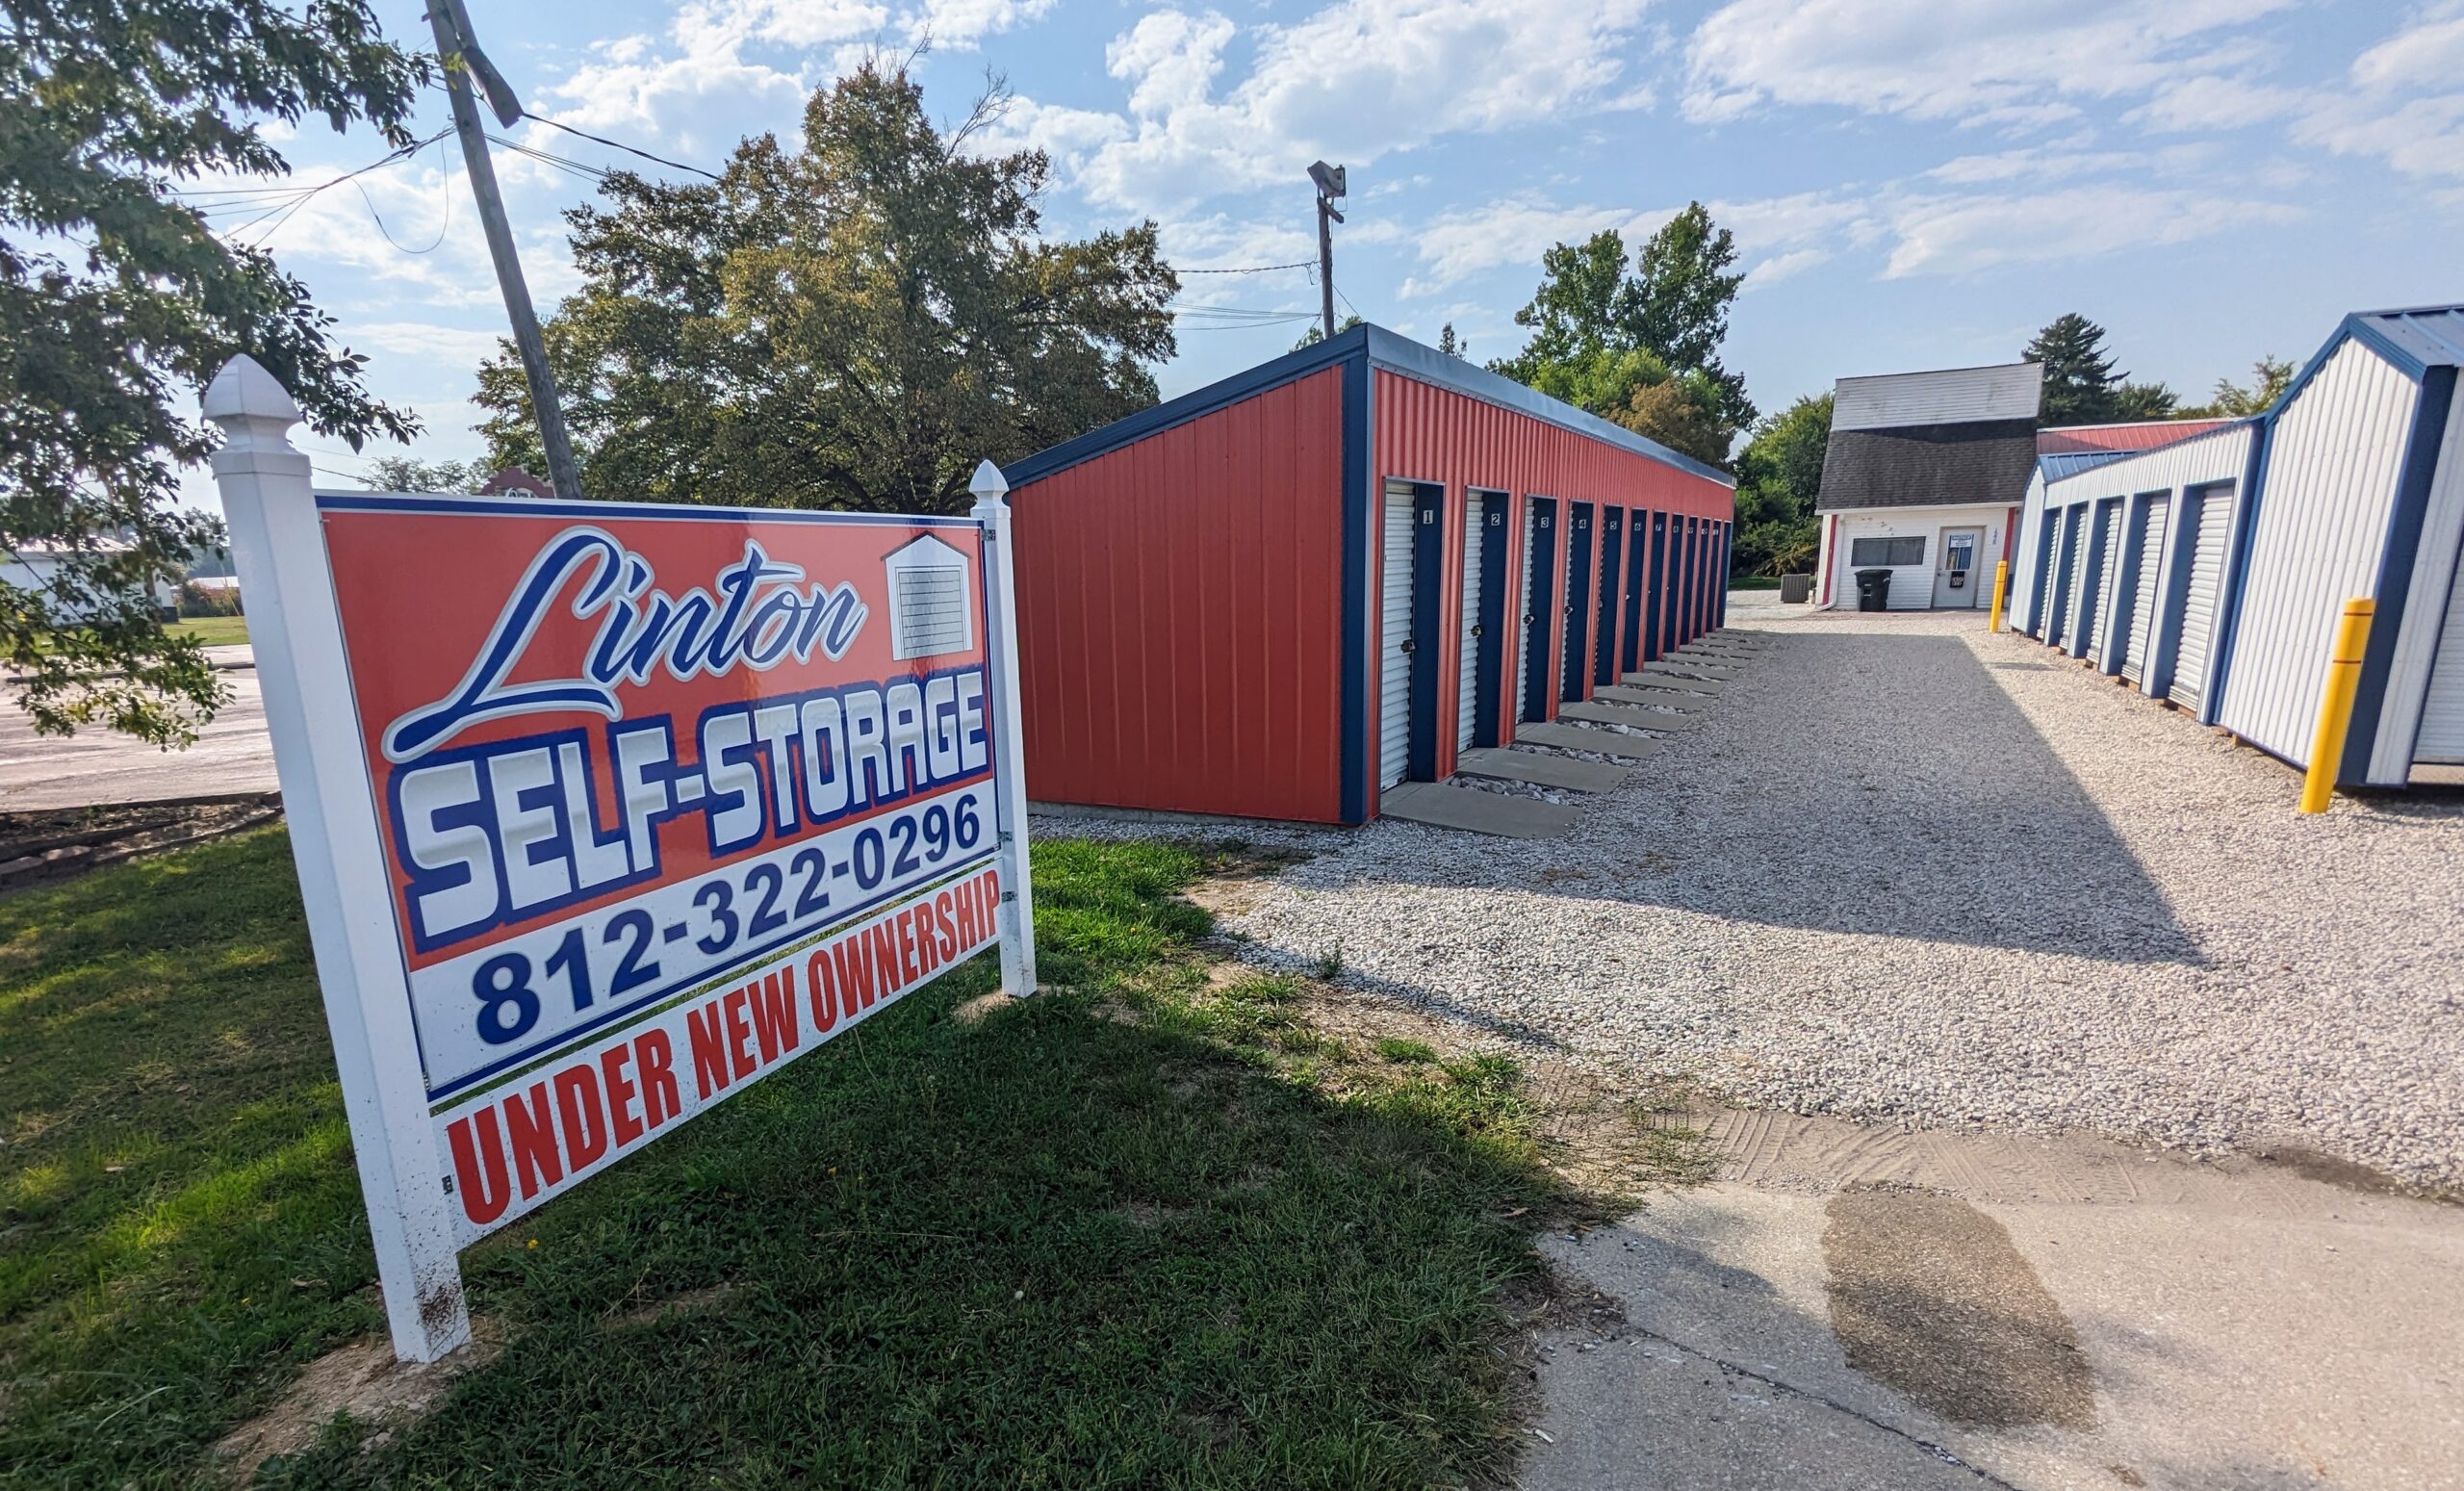 Linton Self Storage - Wide View - Up Close Sign